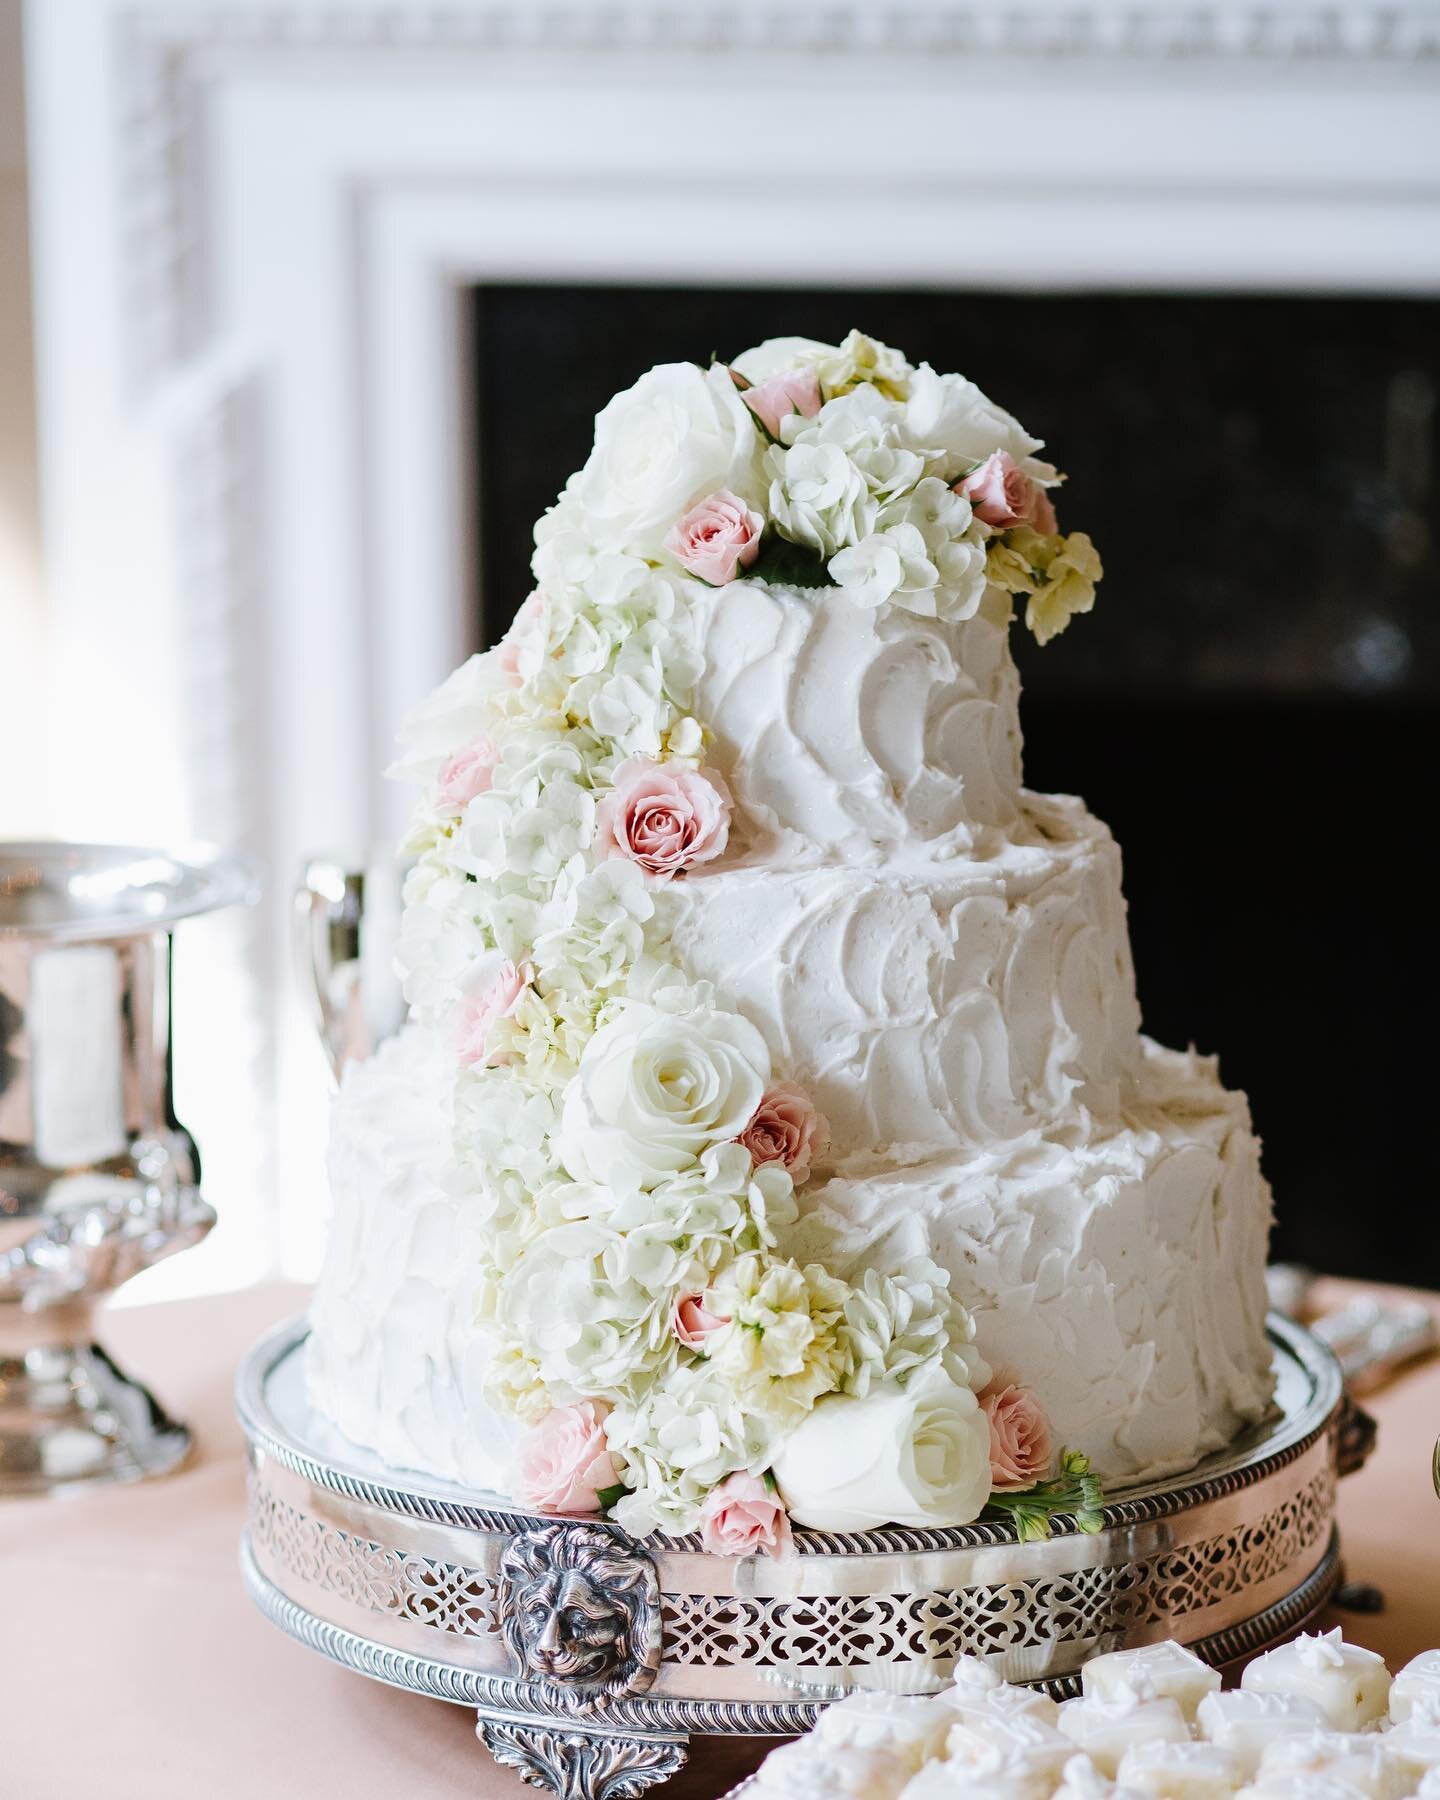 &ldquo;A party without cake is just a meeting&rdquo; - Julia Child ❤️ It&rsquo;s tasting day (!!!) - be sure to follow along in our stories later today for all the fun ❤️❤️❤️. Real KBE bride: @annawalton_  Photo: @dragonflyphotography #kaleebakereven